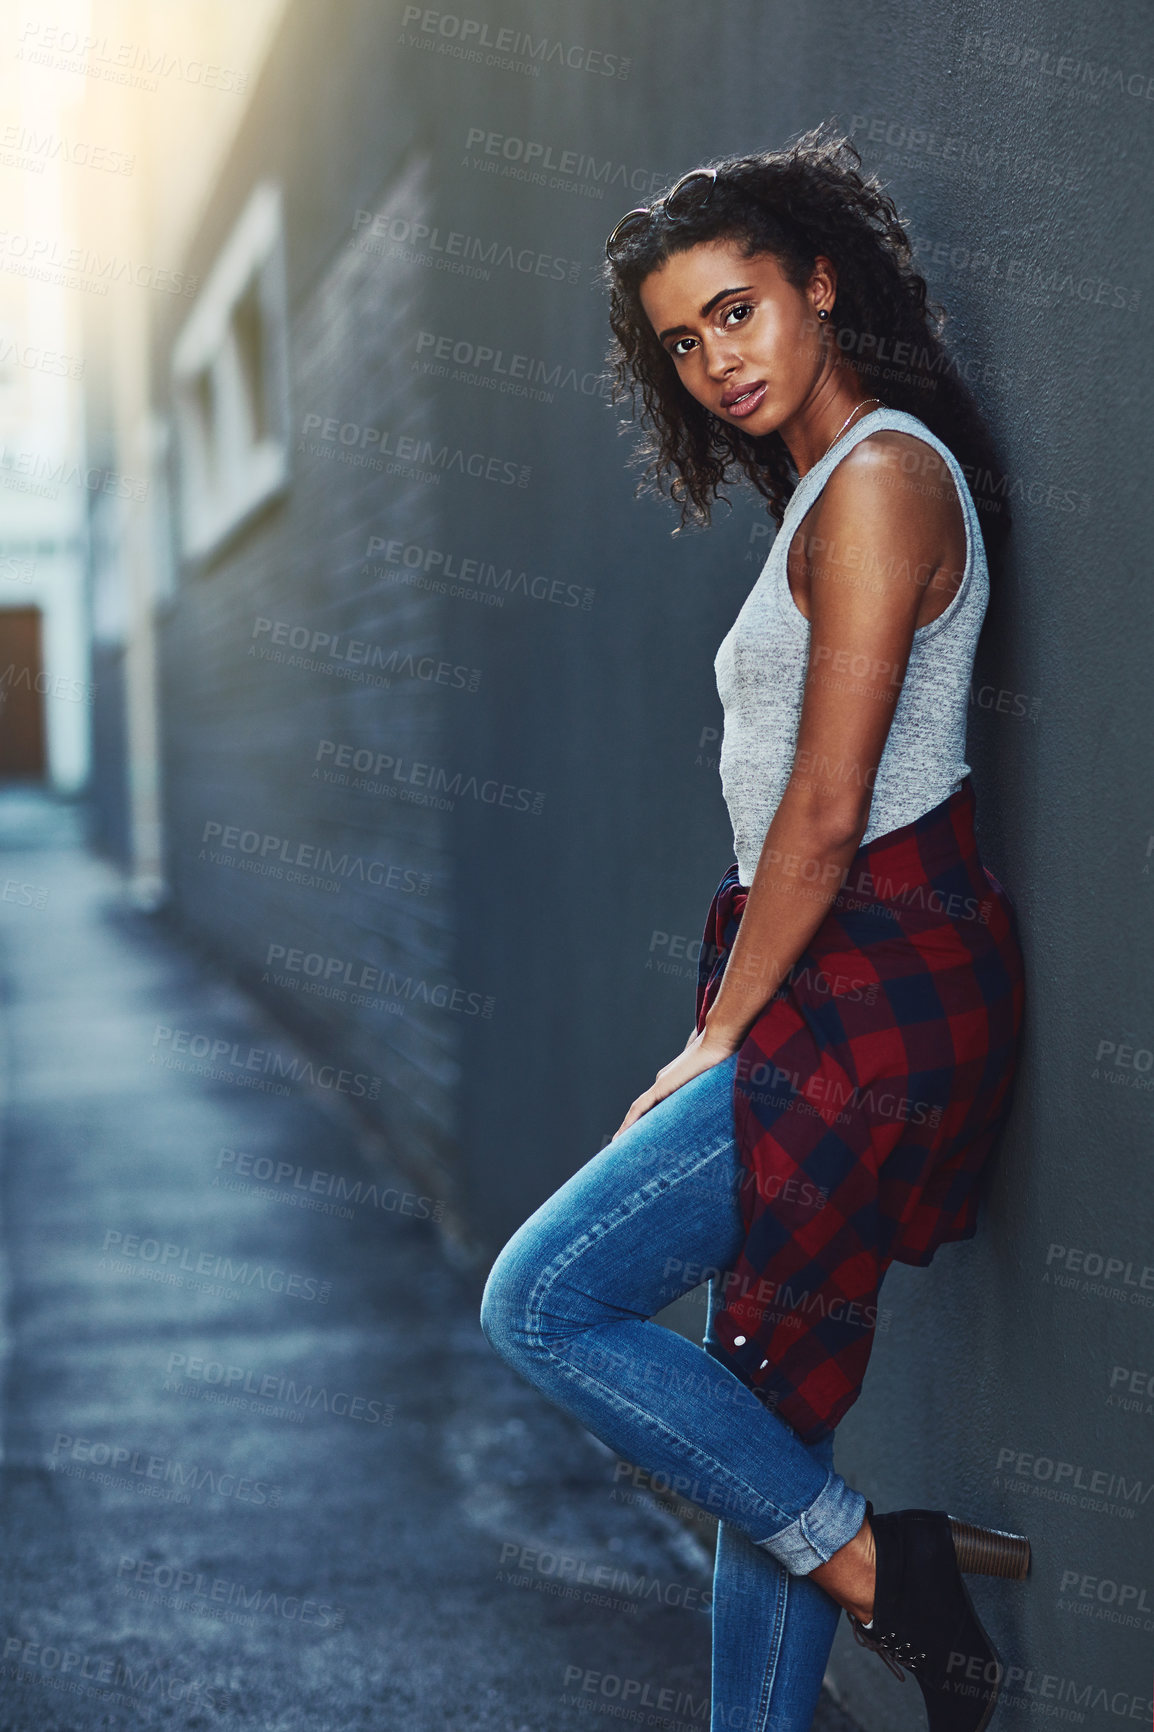 Buy stock photo Shot of an attractive young woman posing against a wall in the city